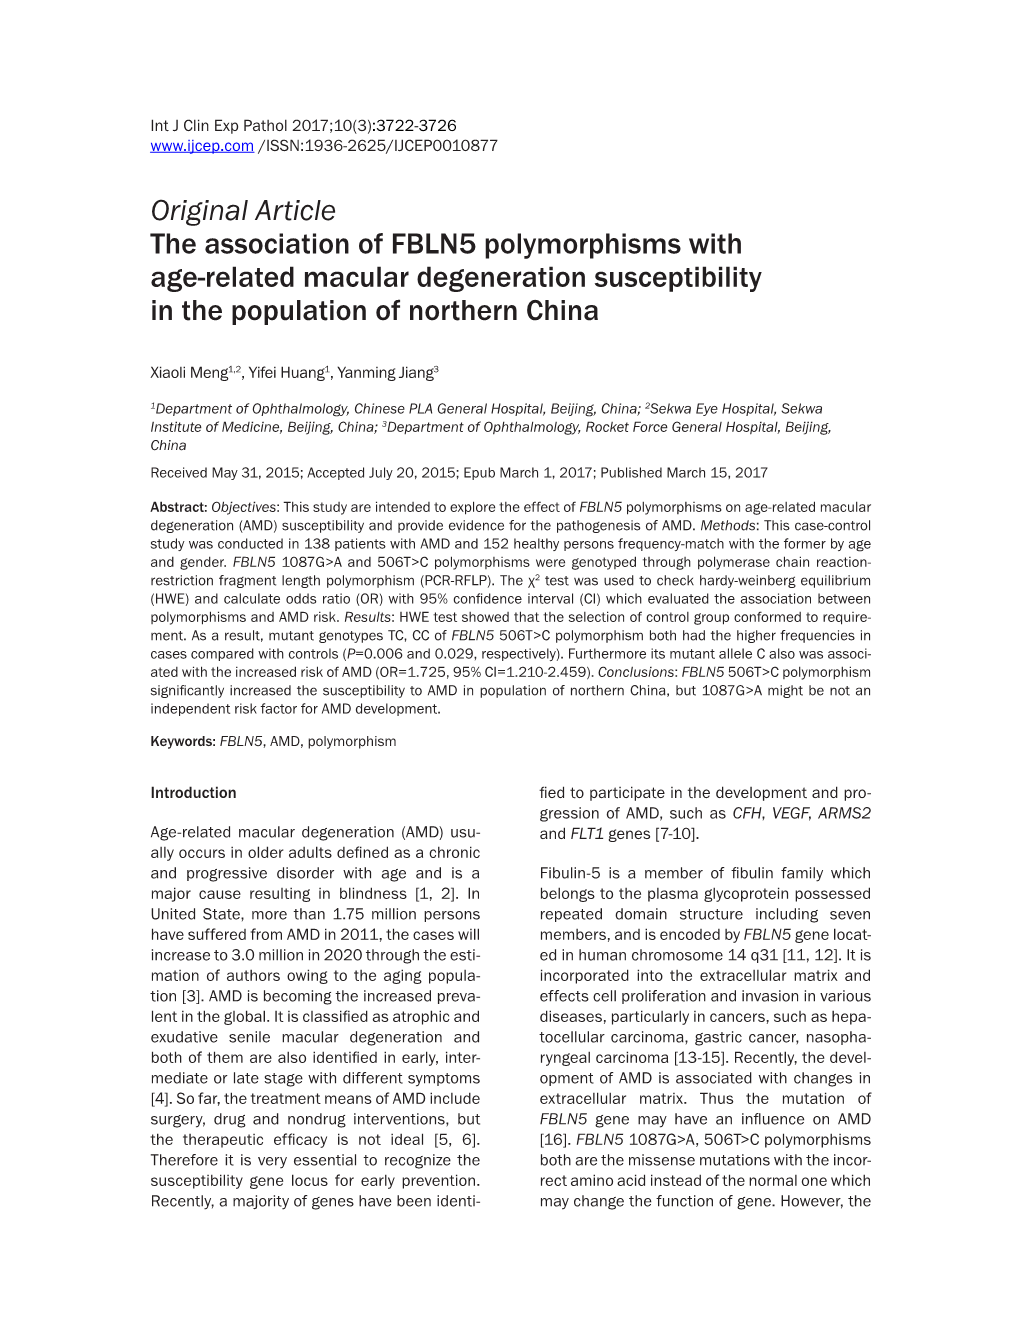 Original Article the Association of FBLN5 Polymorphisms with Age-Related Macular Degeneration Susceptibility in the Population of Northern China